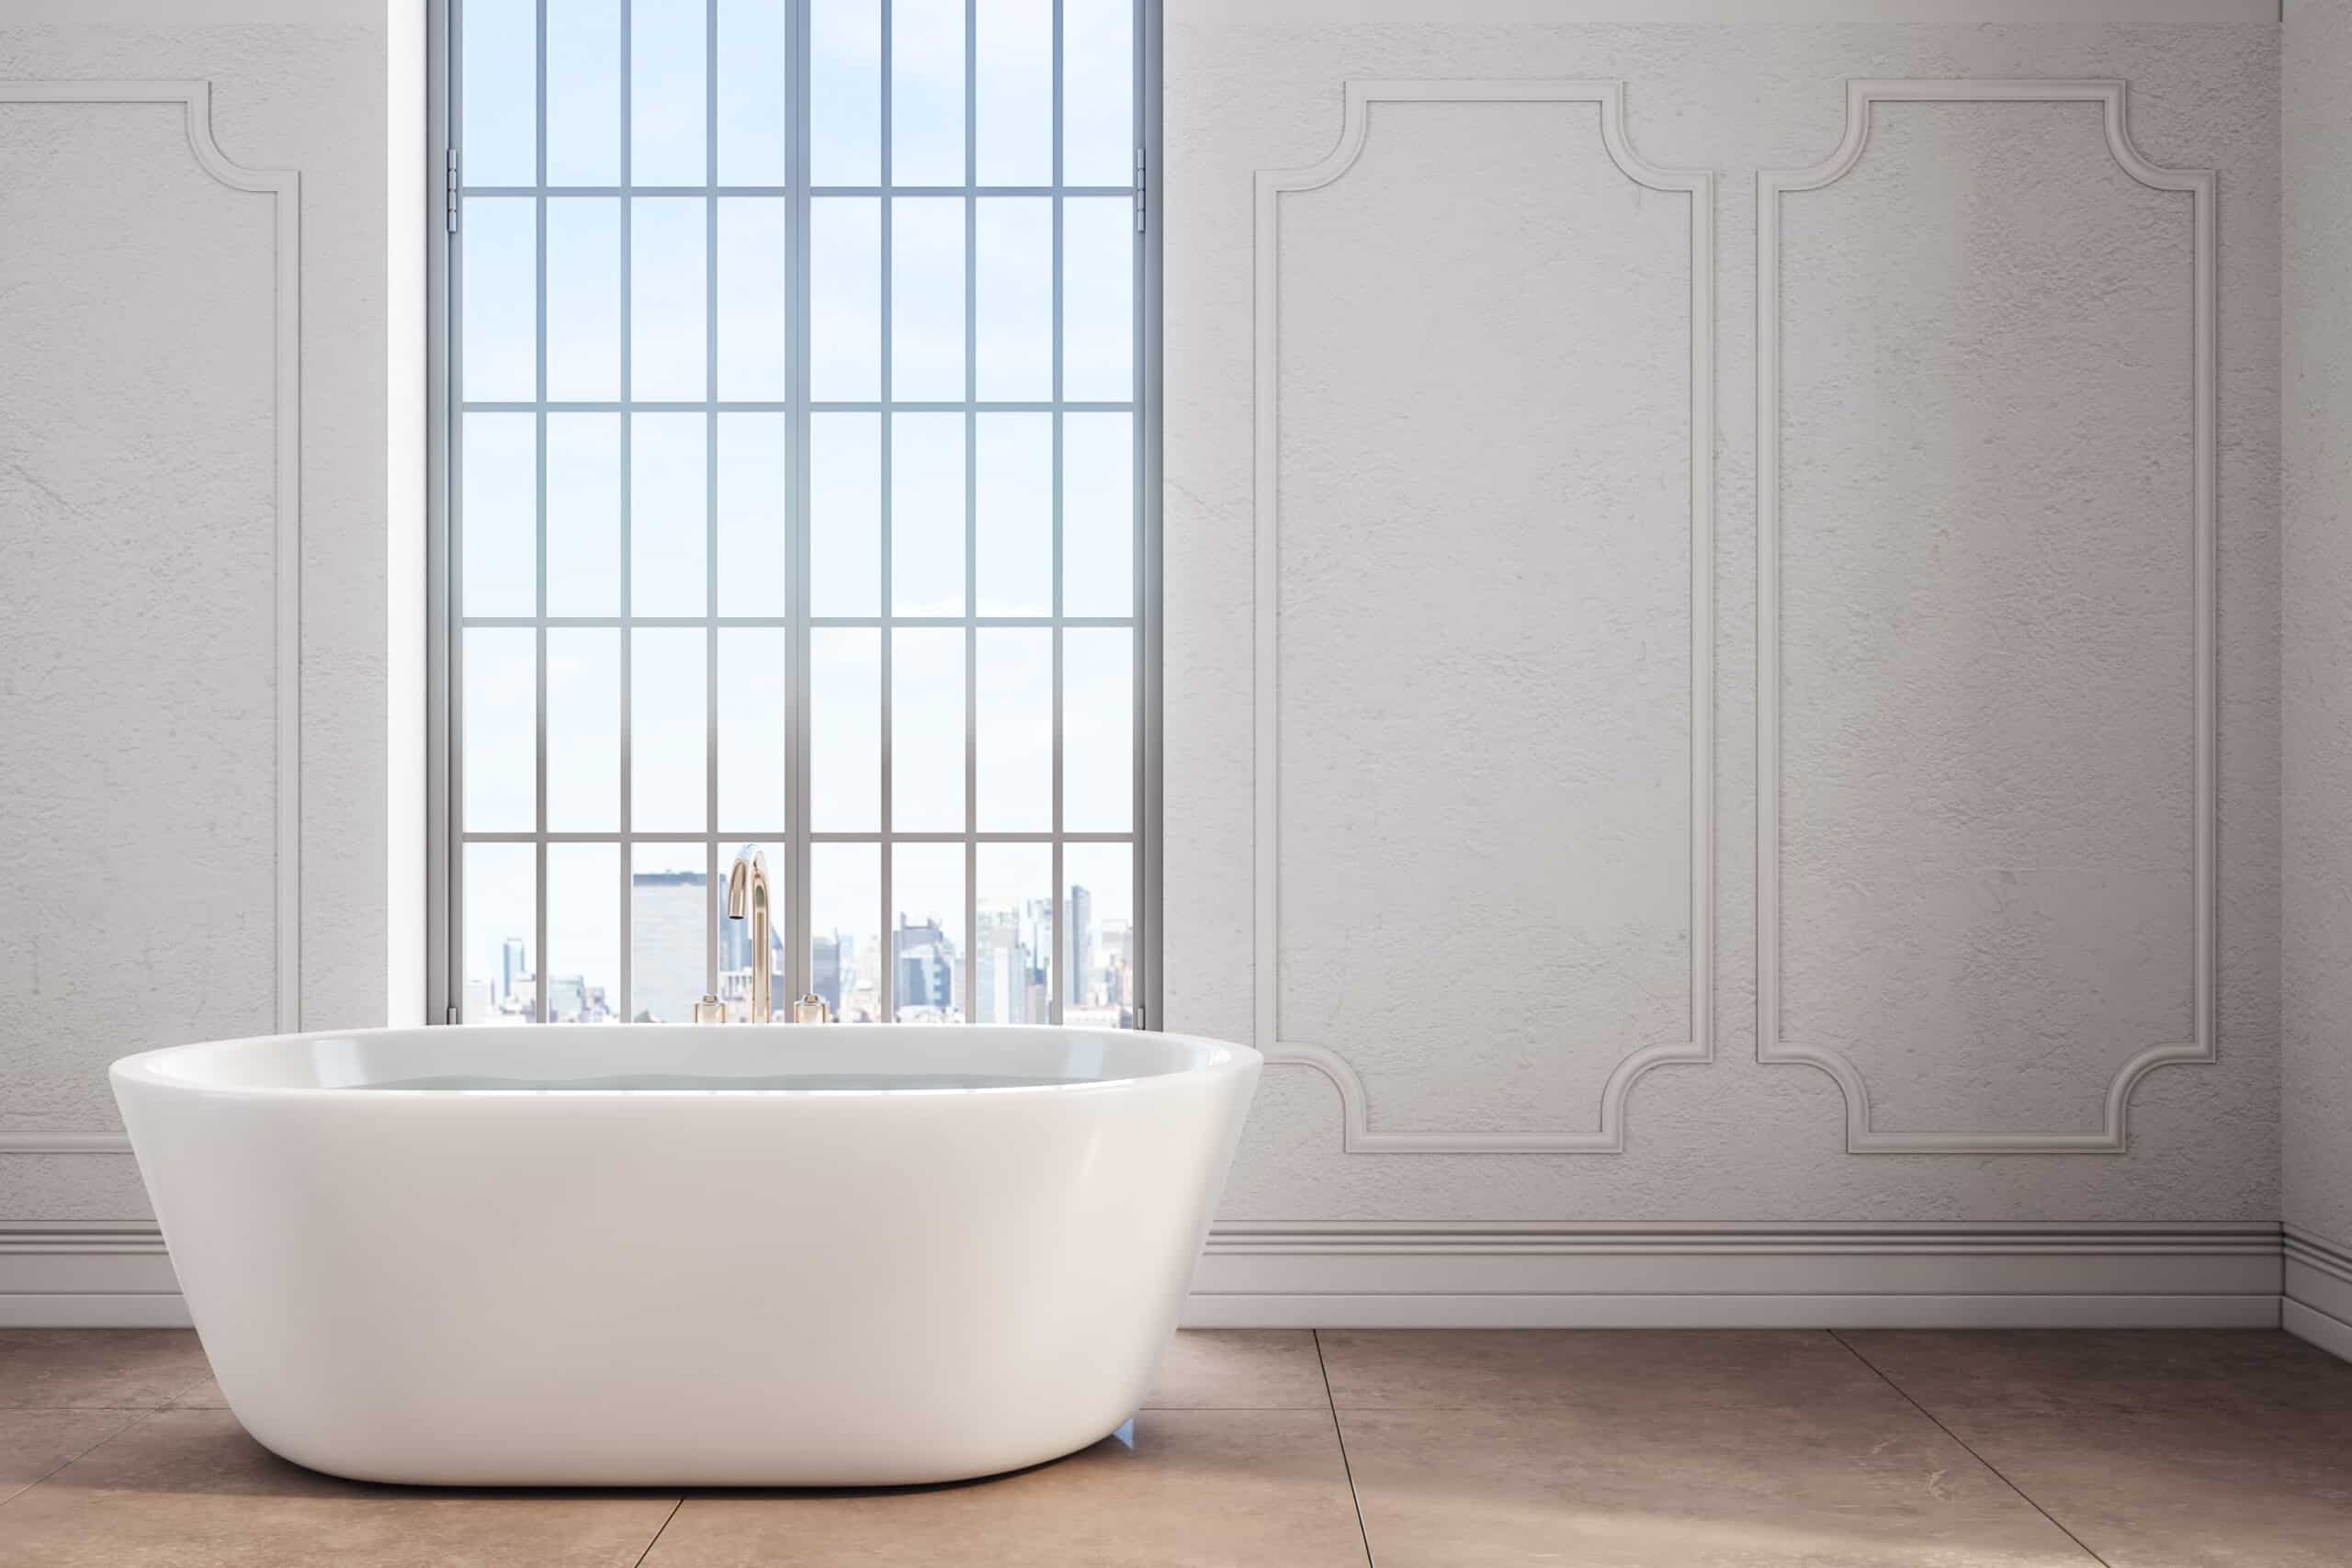 Modern bathroom interior with bathtub, copy space on wall and city view. wainscoting in the bathroom